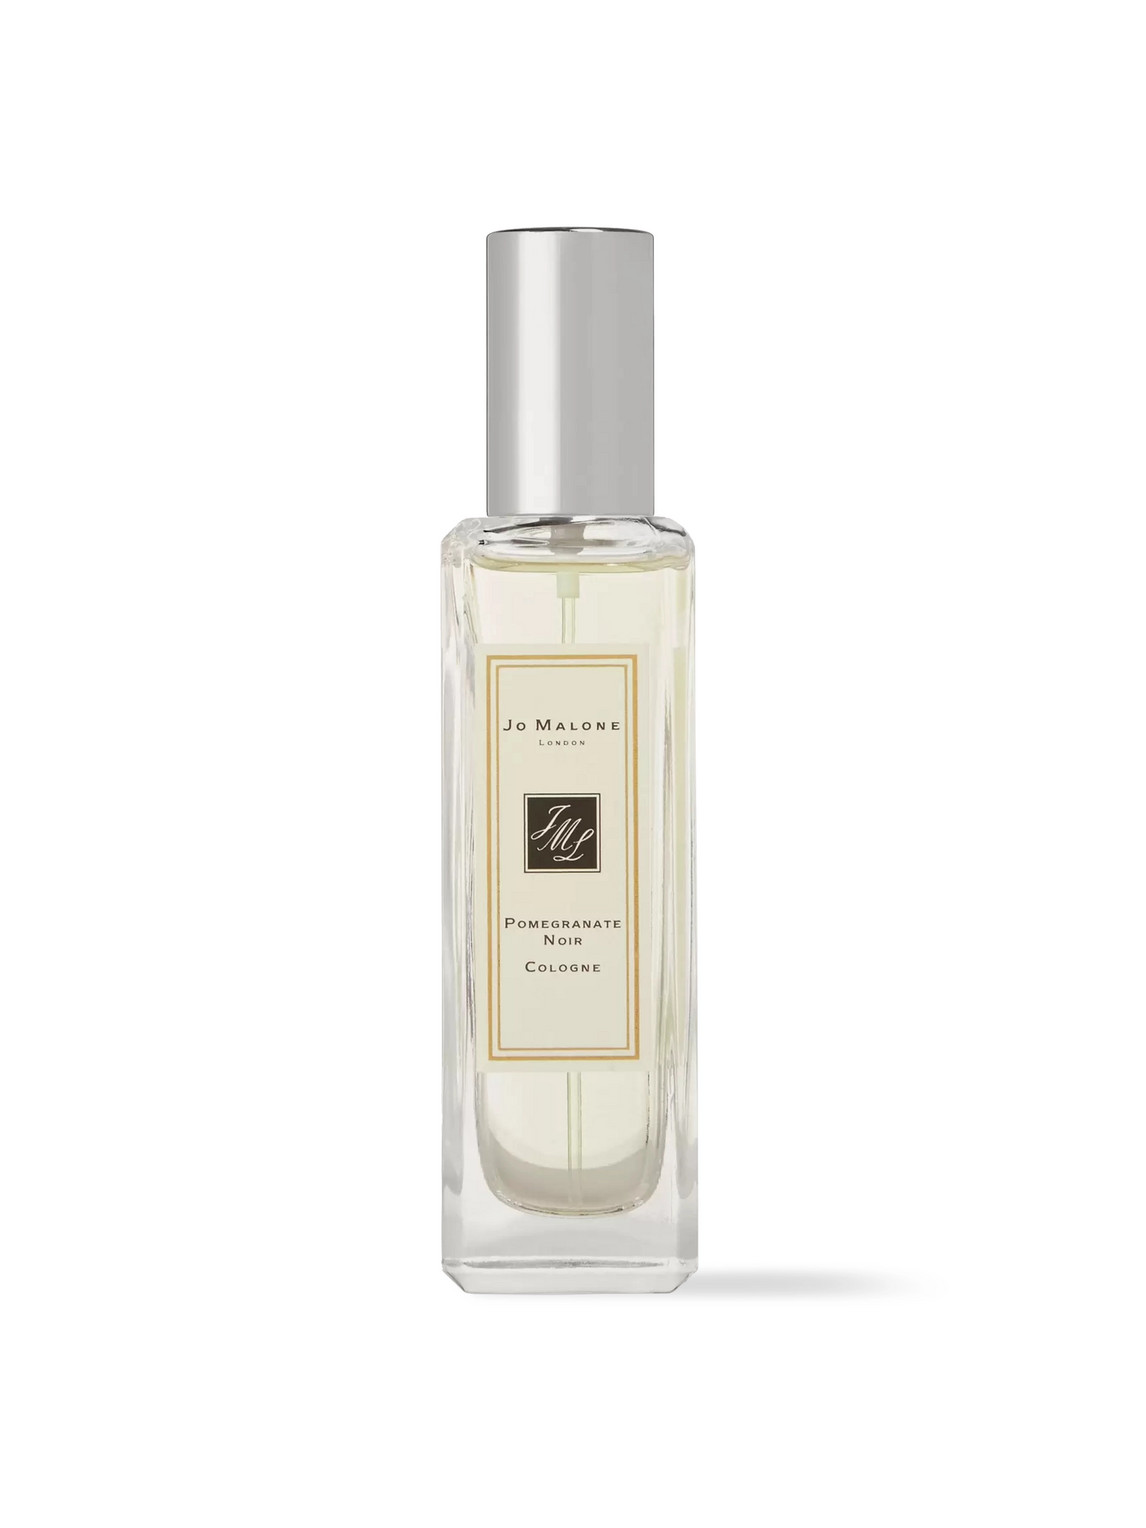 Jo Malone London Pomegranate Noir Cologne, 30ml In Colorless